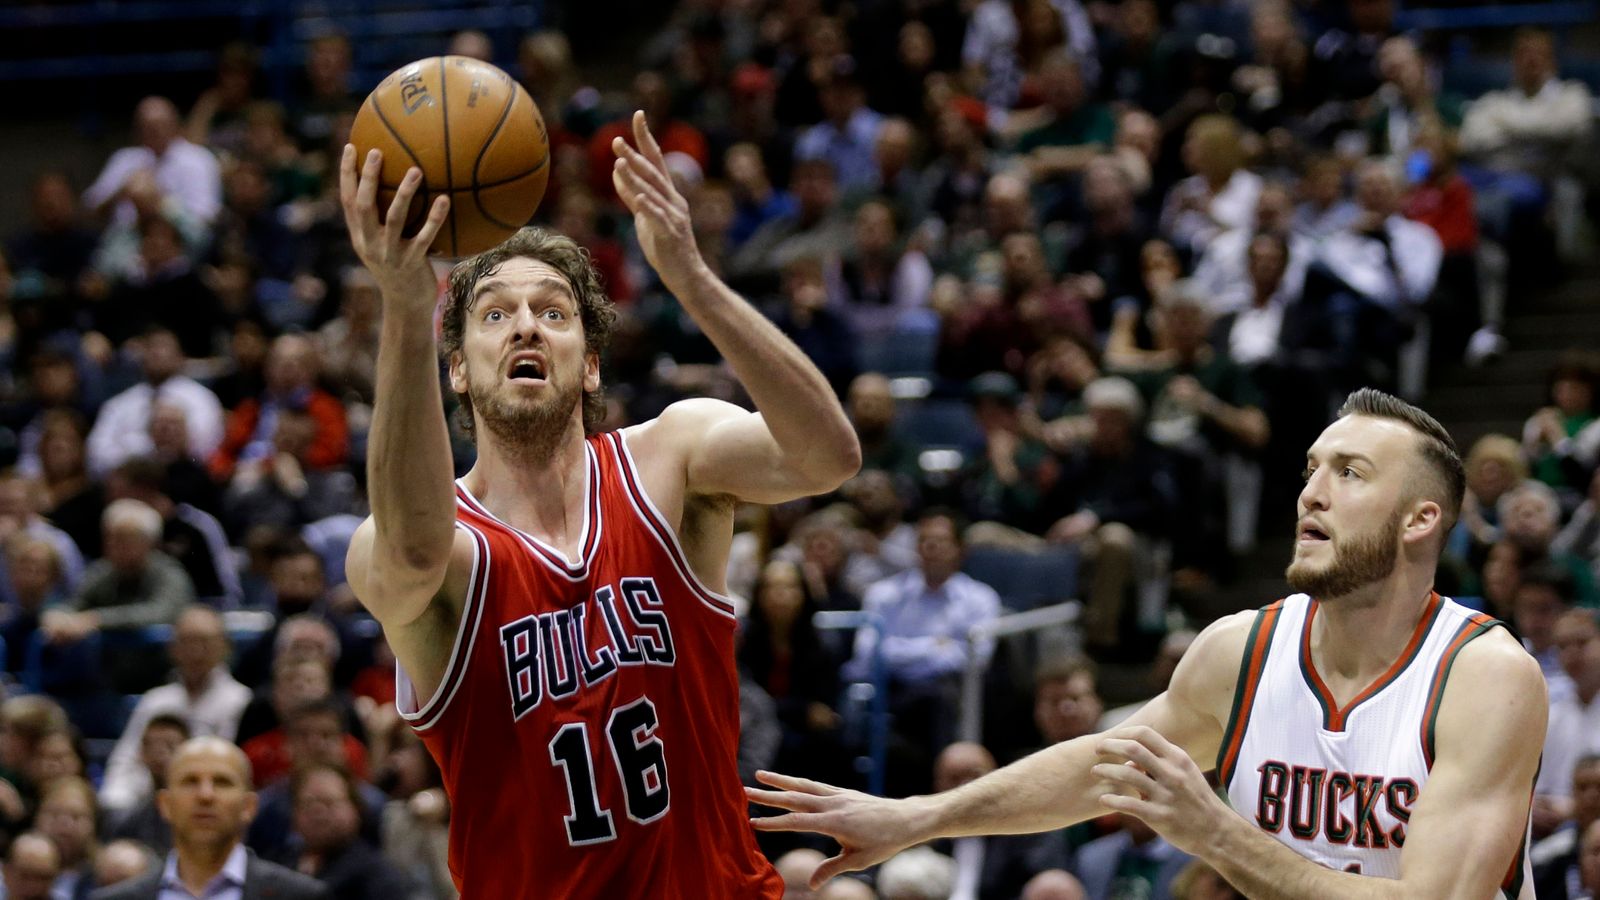 Spurs Officially Add Pau Gasol to Help Replace Tim Duncan - The